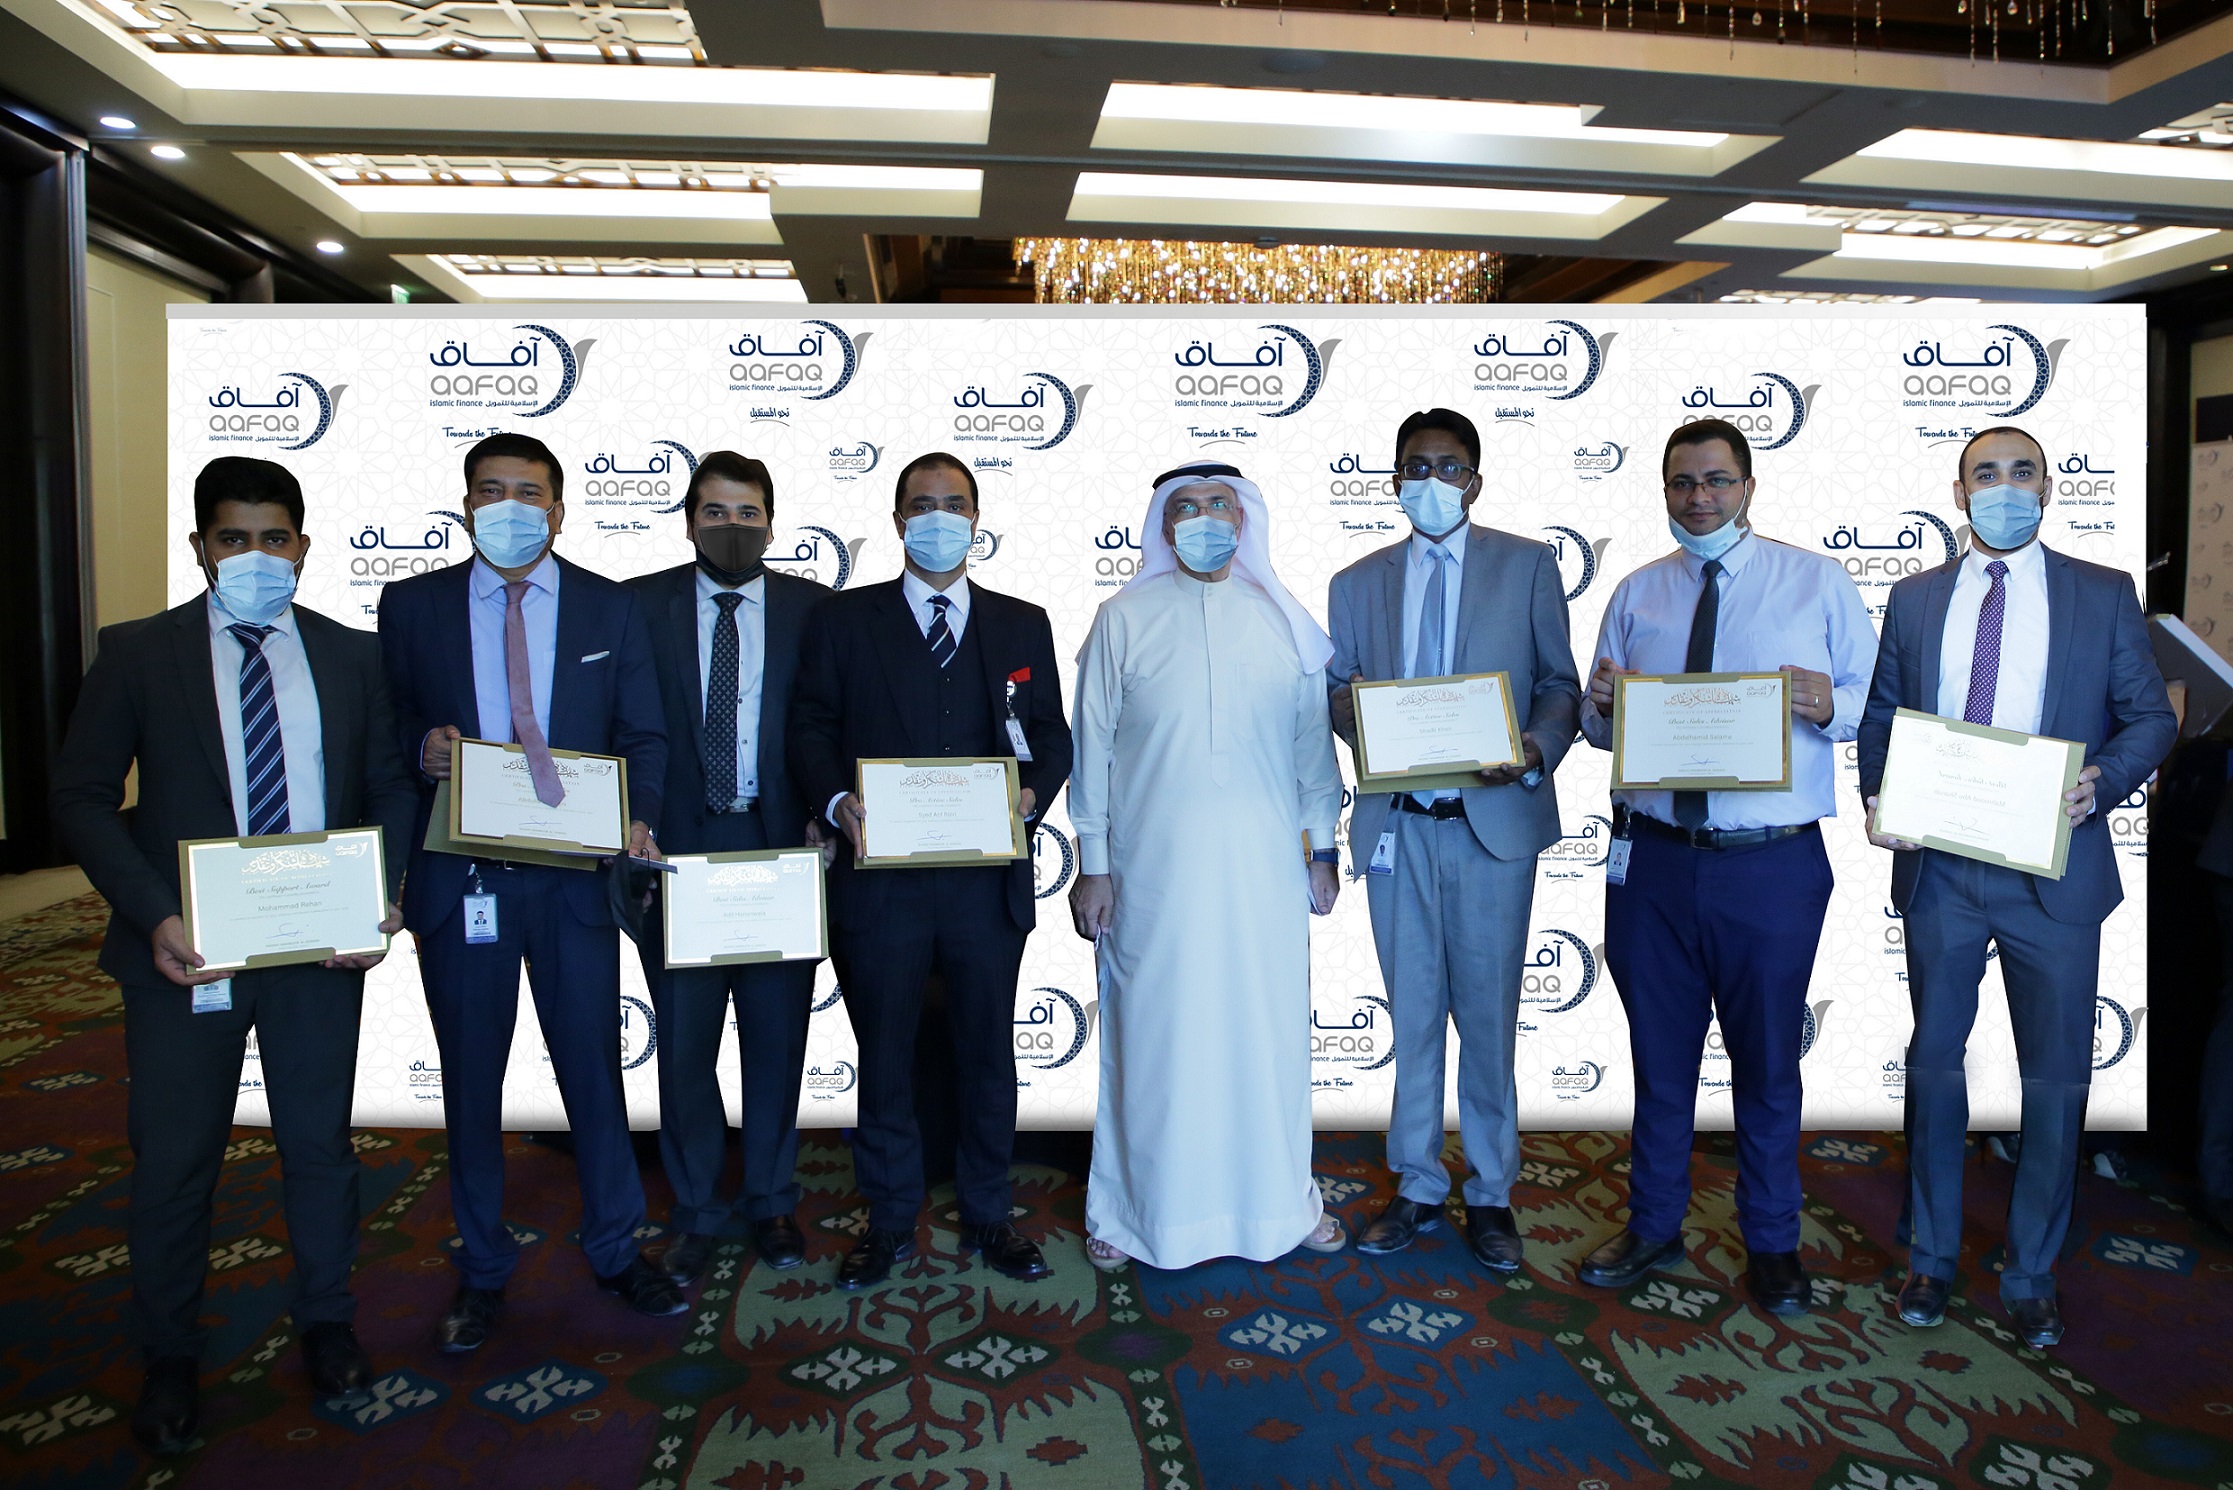 "Aafaq Islamic Finance" honors employees in recognition of their role and achievements in ceremony